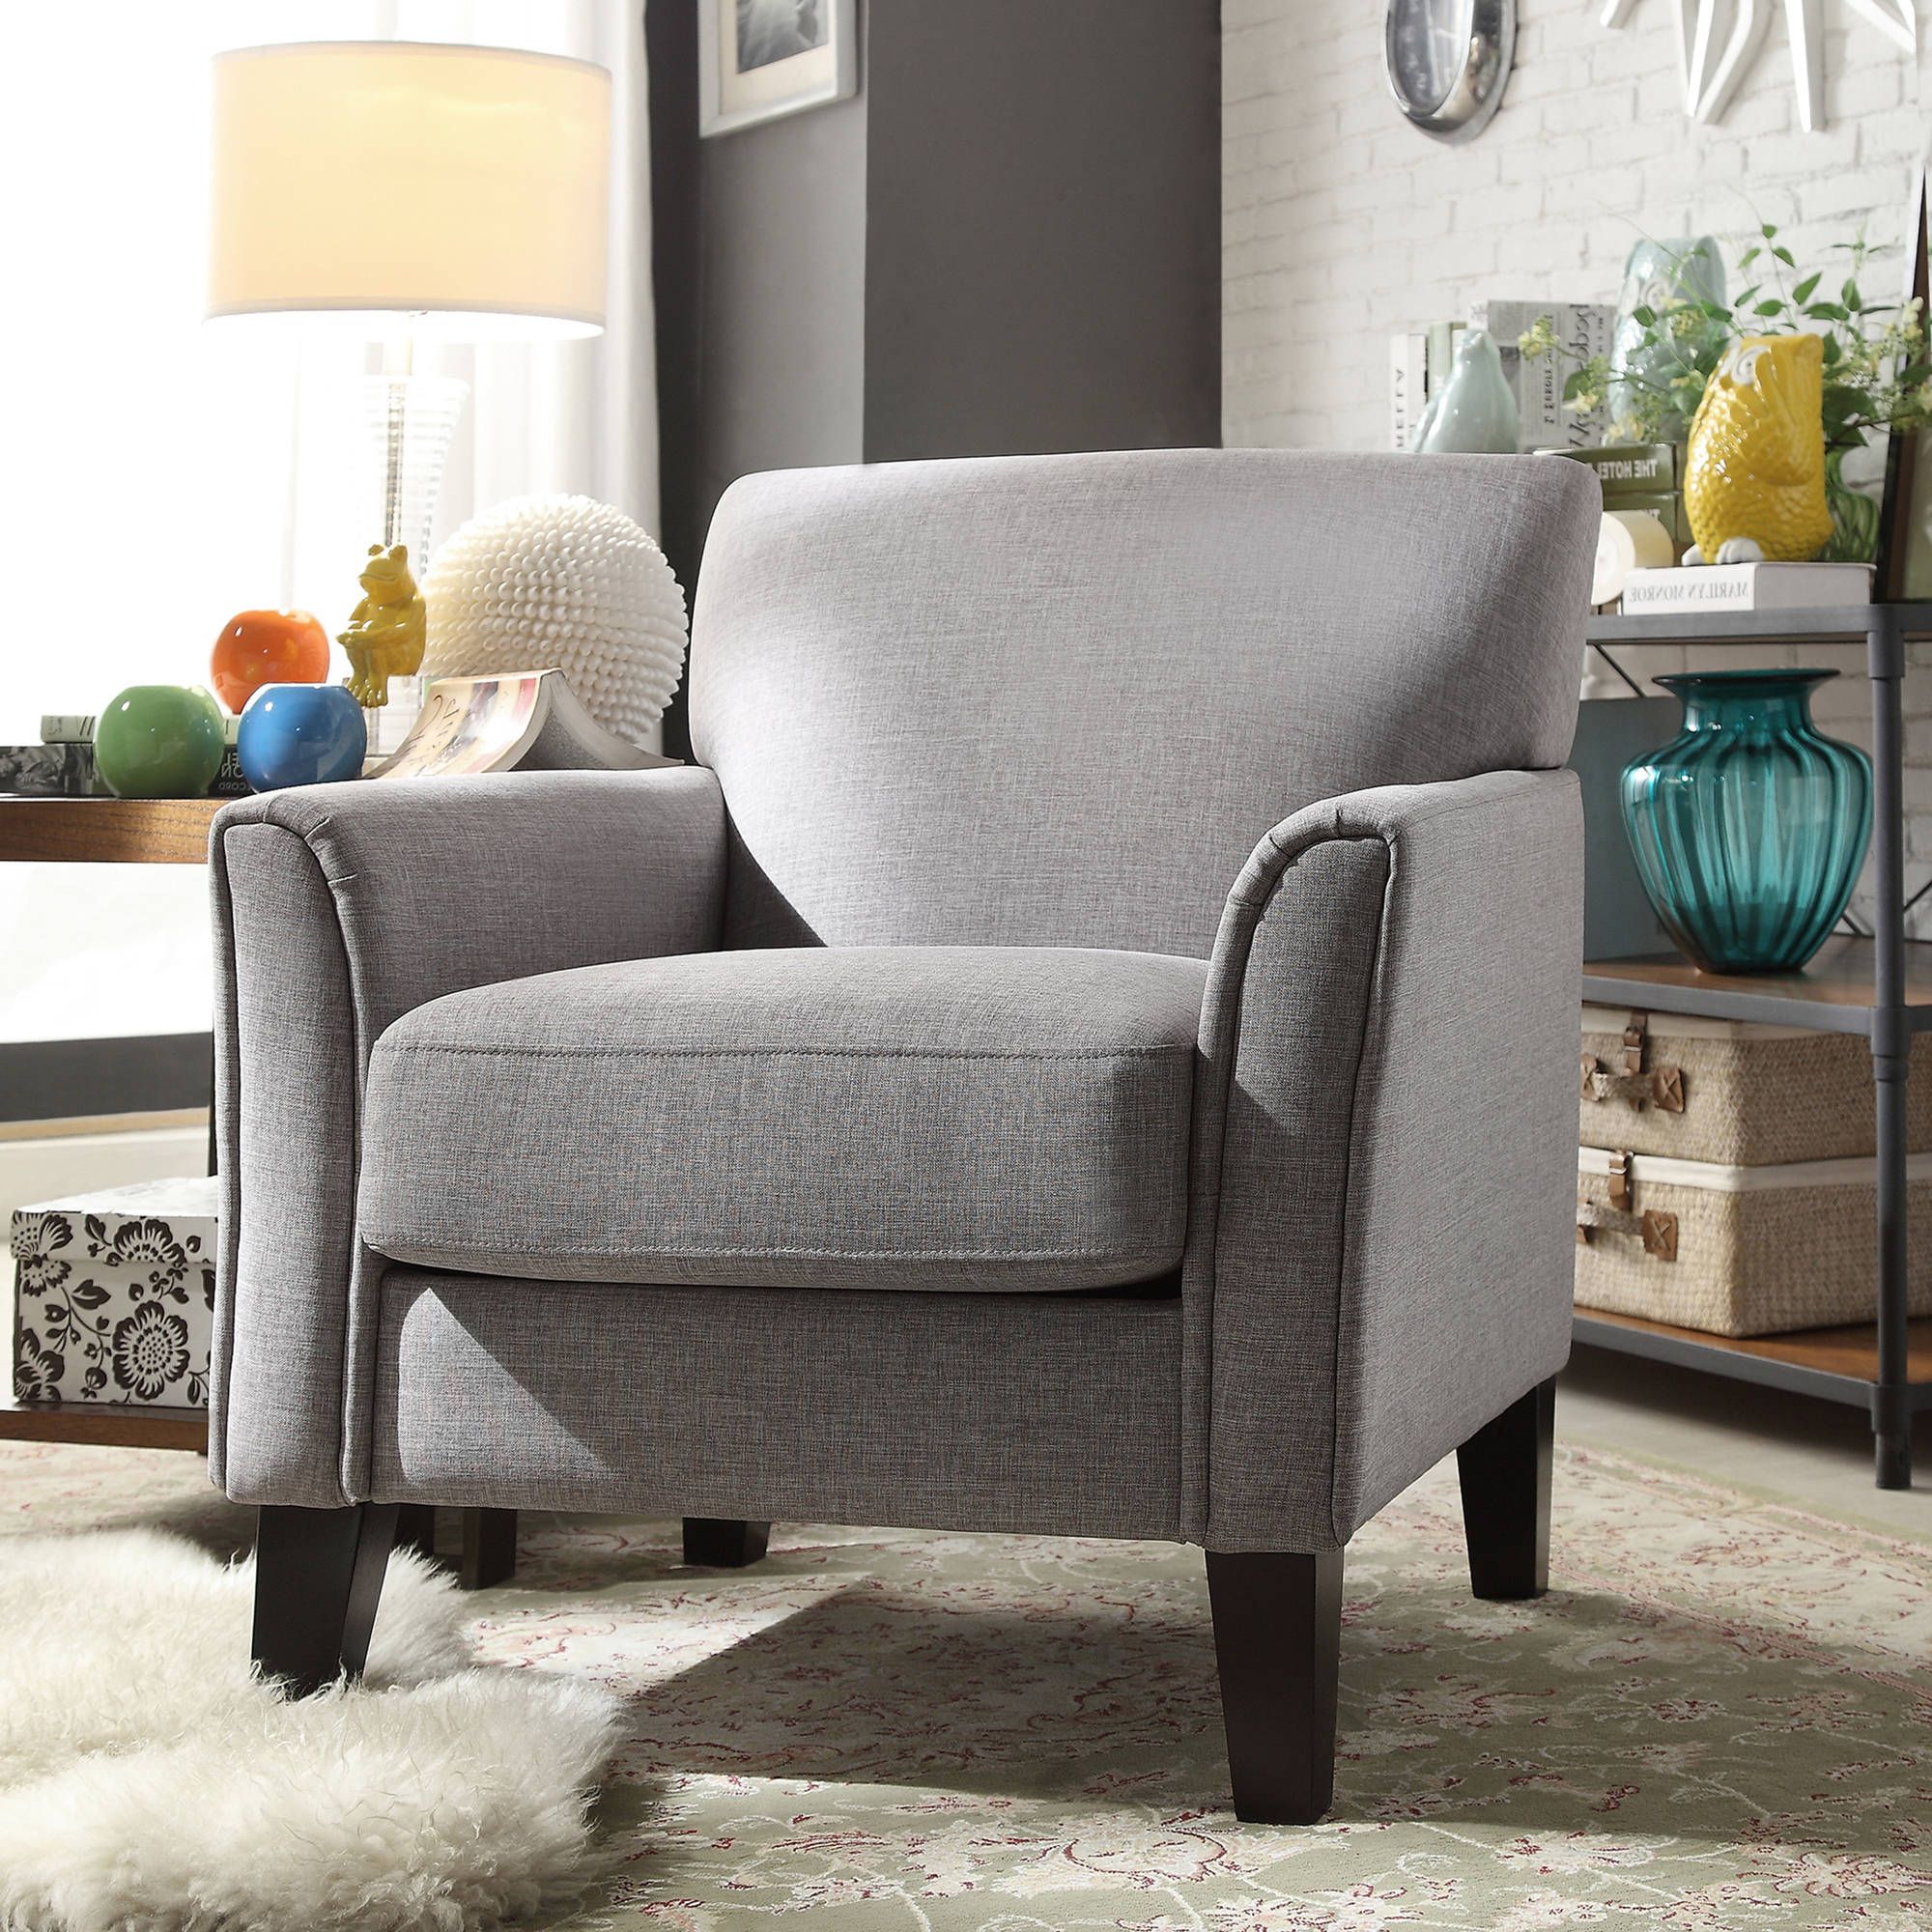 Weston Home Tribeca Living Room Upholstered Accent Chair, Grey Linen In Preferred Smoke Gray Wood Accent Stools (View 1 of 10)